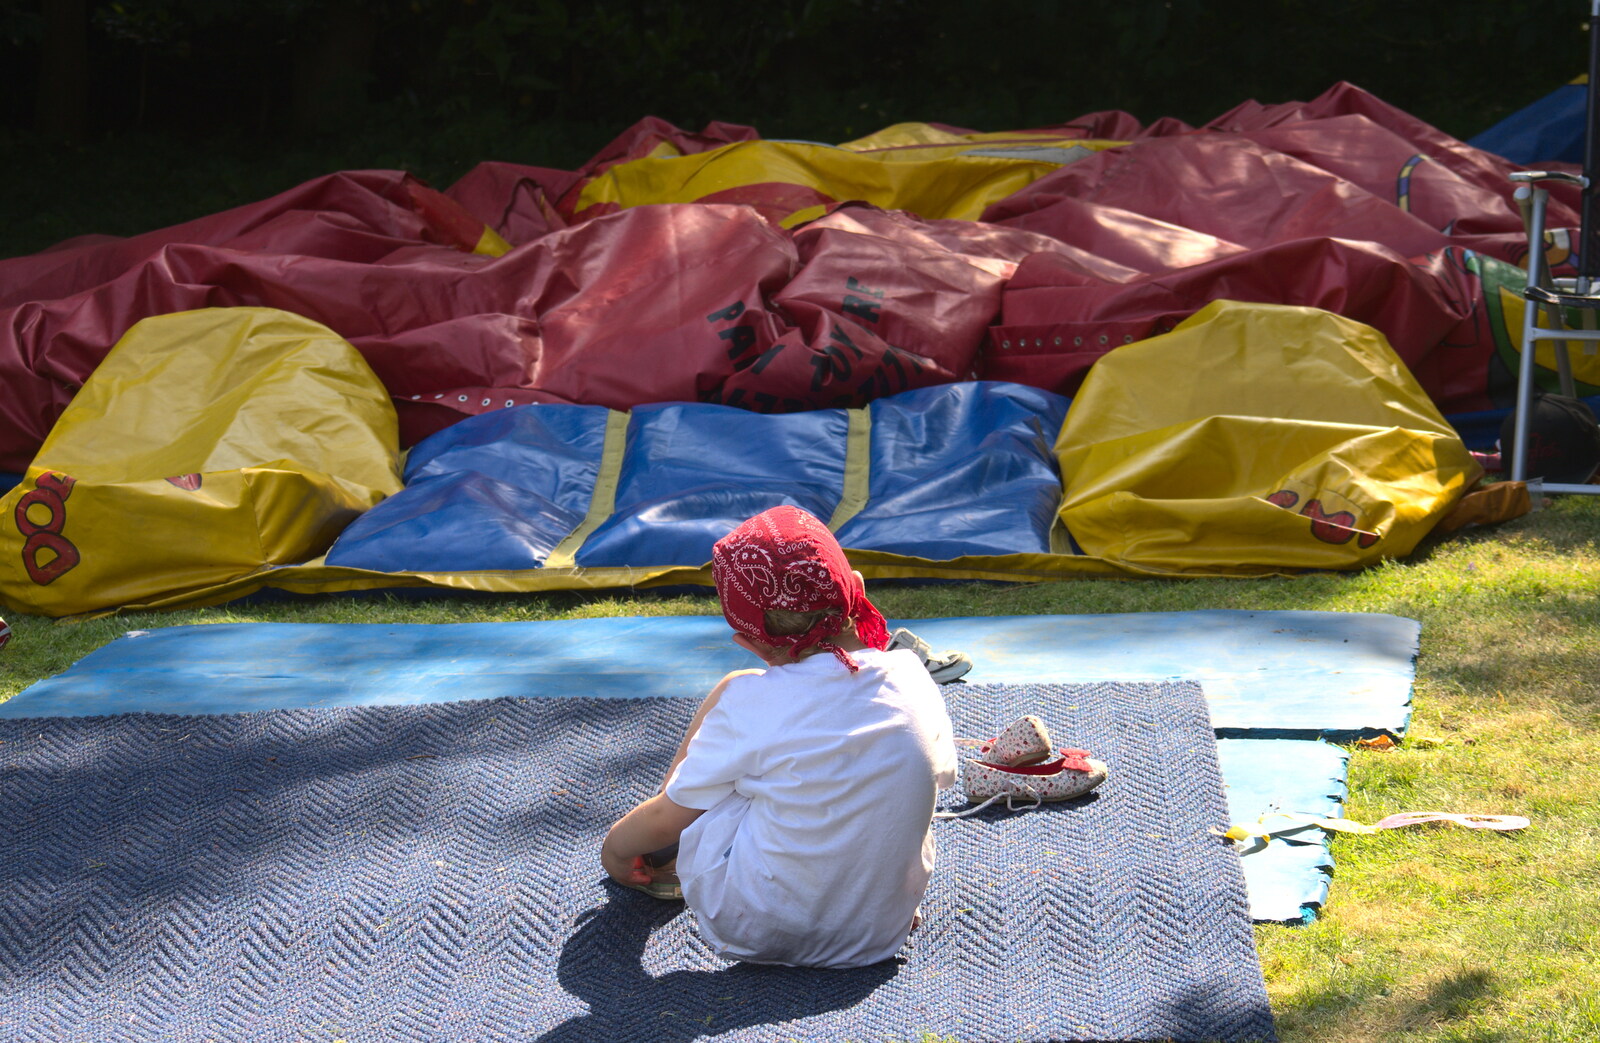 Fred and the sad sight of a deflated bouncy castle from Marconi's Demolition and Brome Village Fete, Chelmsford and Brome, Suffolk - 6th July 2013